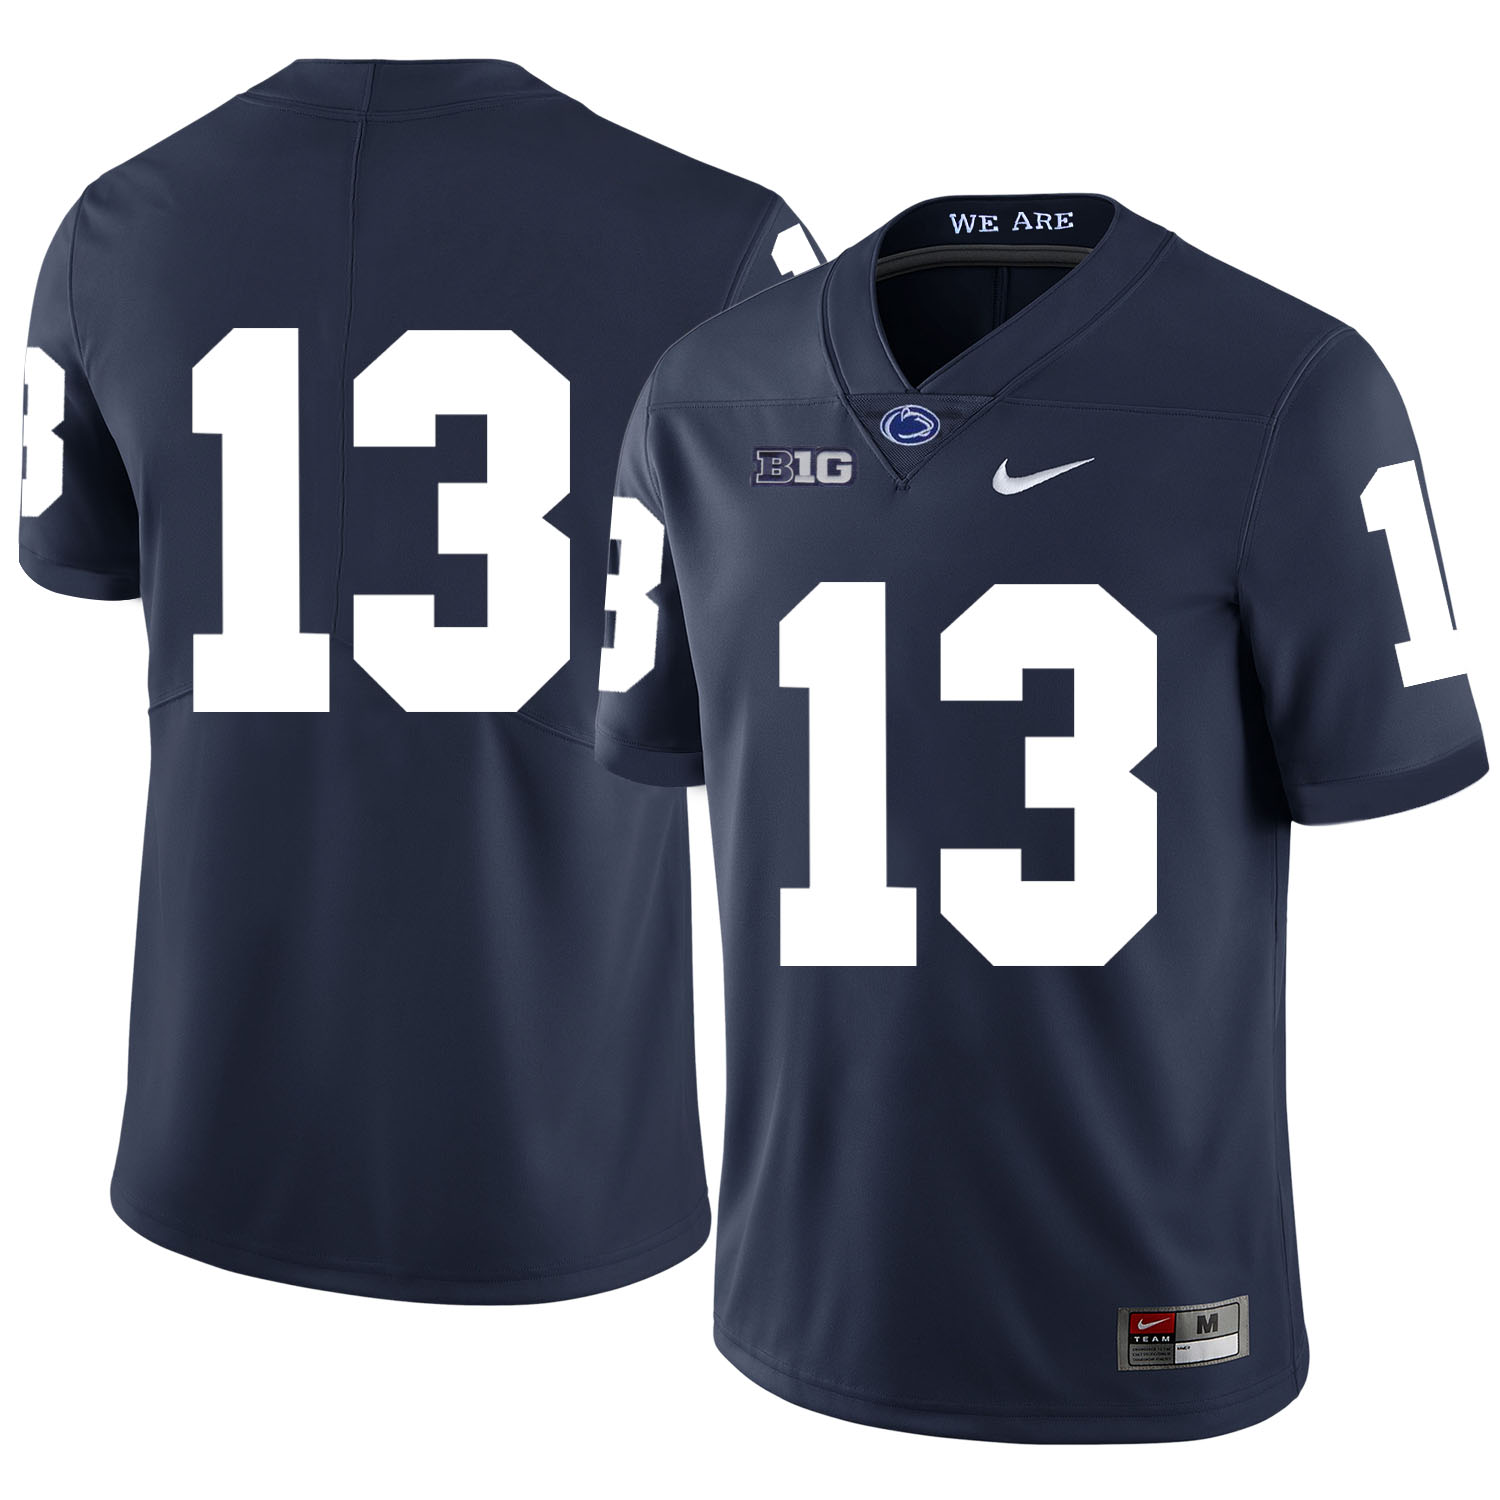 Penn State Nittany Lions 13 Saeed Blacknall Navy Nike College Football Jersey